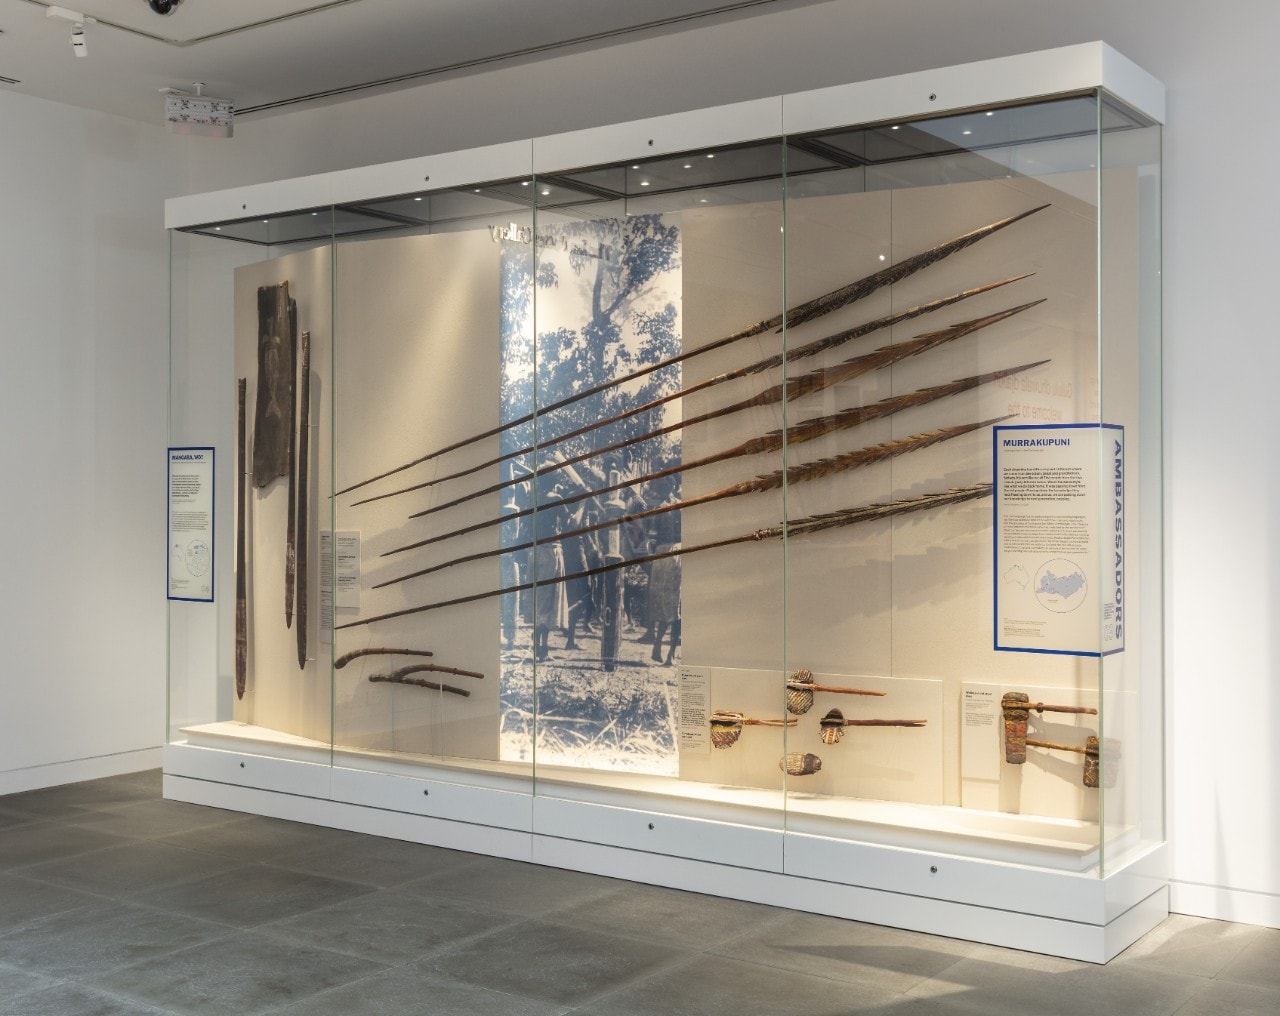 Display case featuring spears, a bark painting and smaller objects